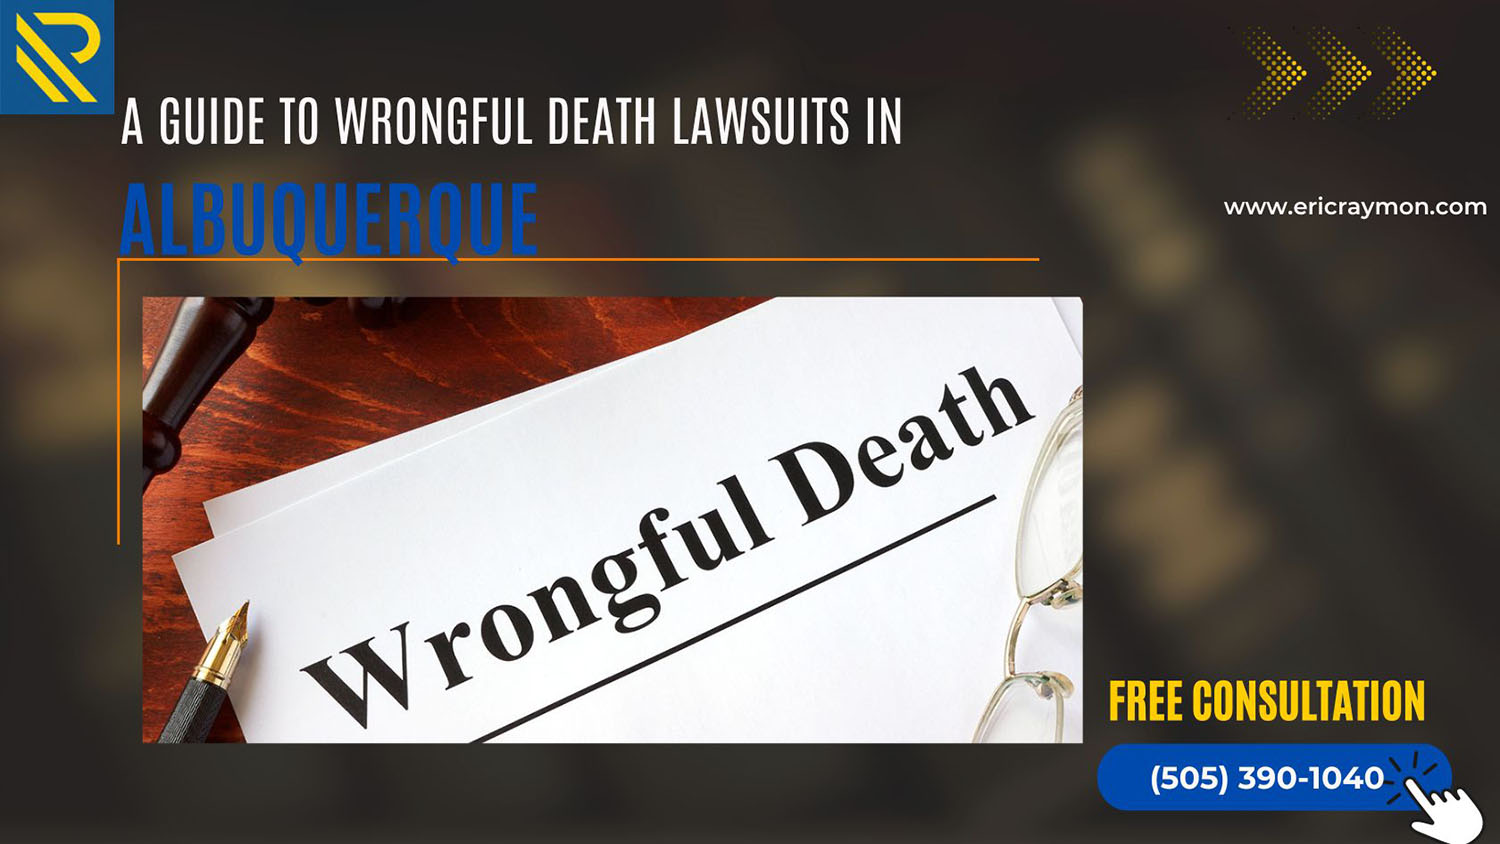 Who Can File a Wrongful Death Claim in New Mexico